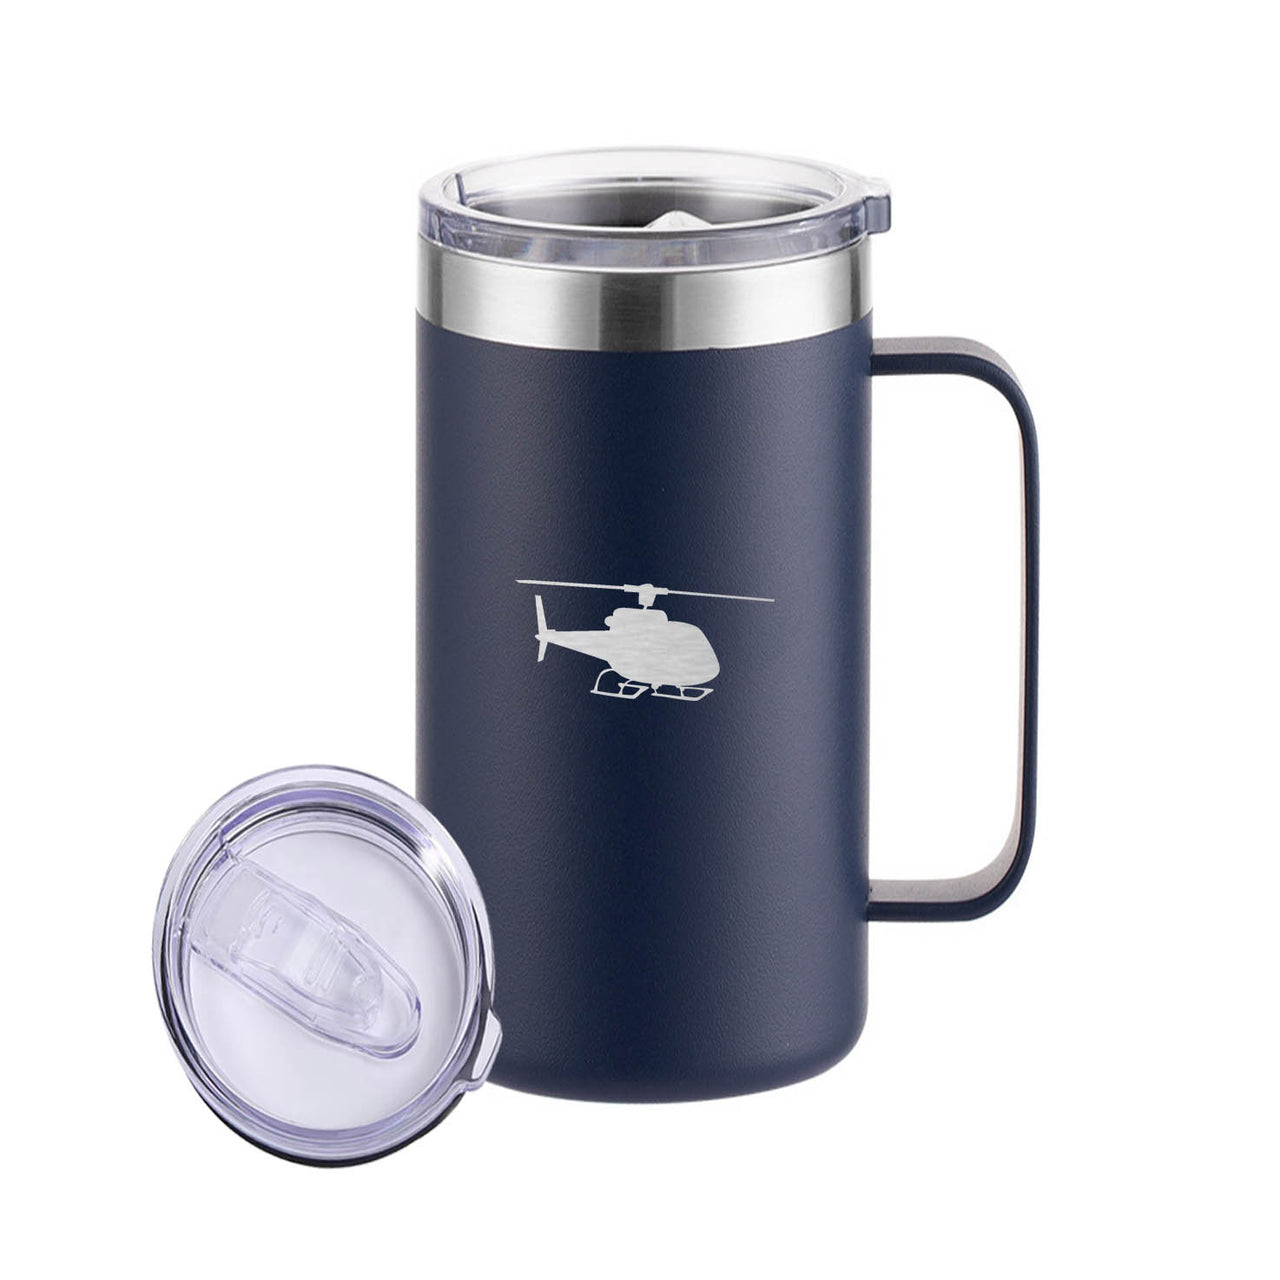 Helicopter Designed Stainless Steel Beer Mugs